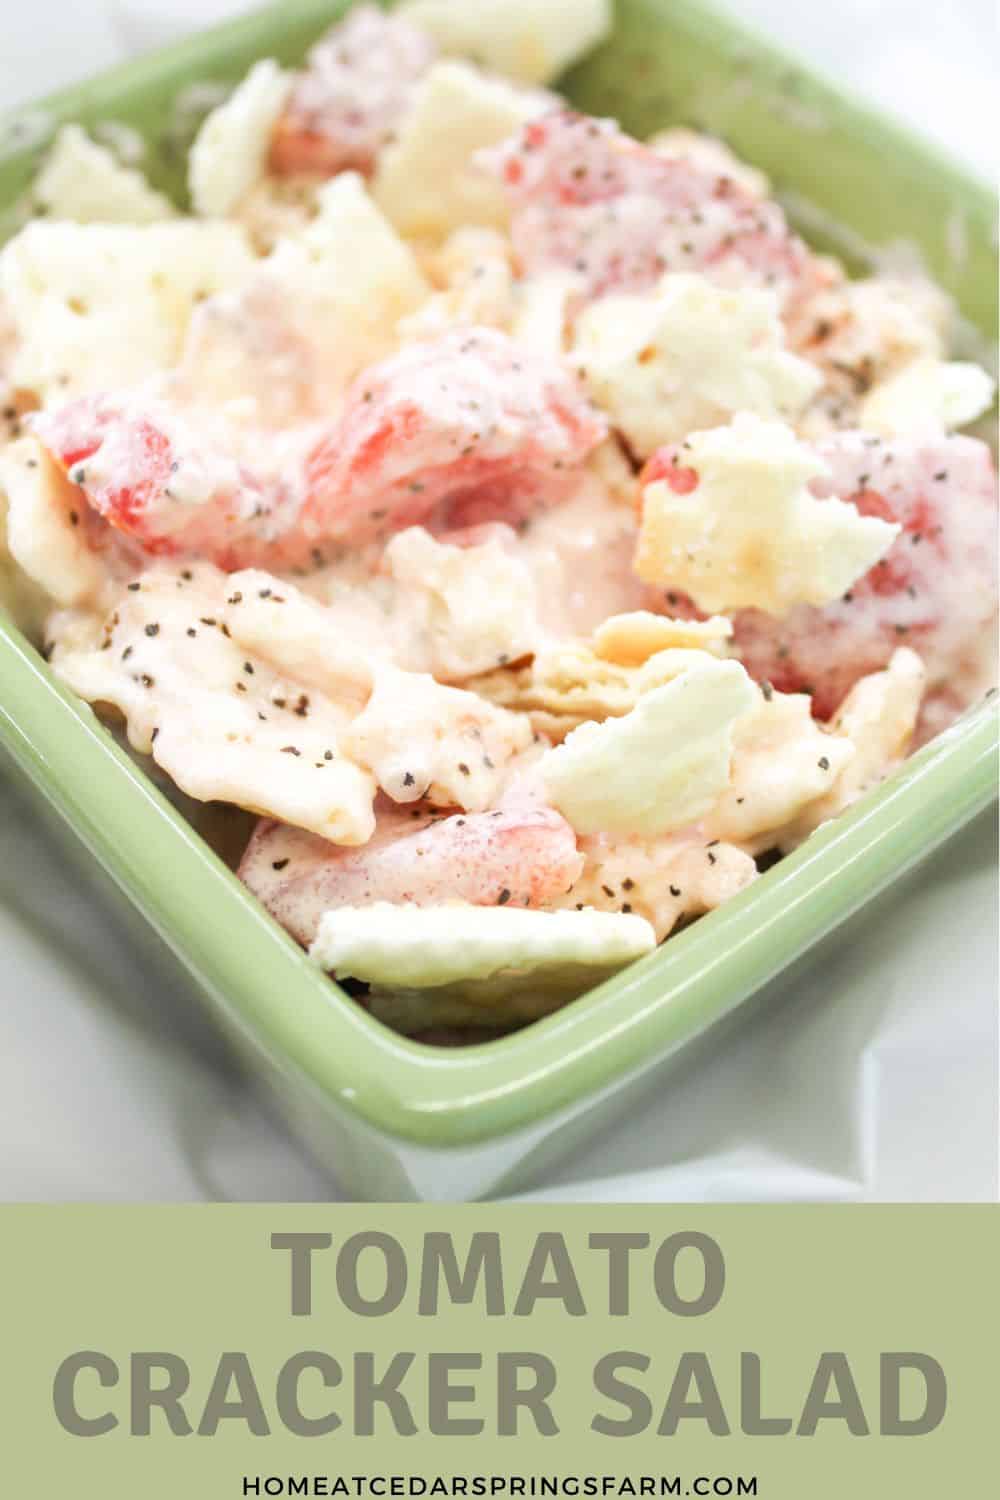 Tomato cracker salad in a green bowl with text overlay.